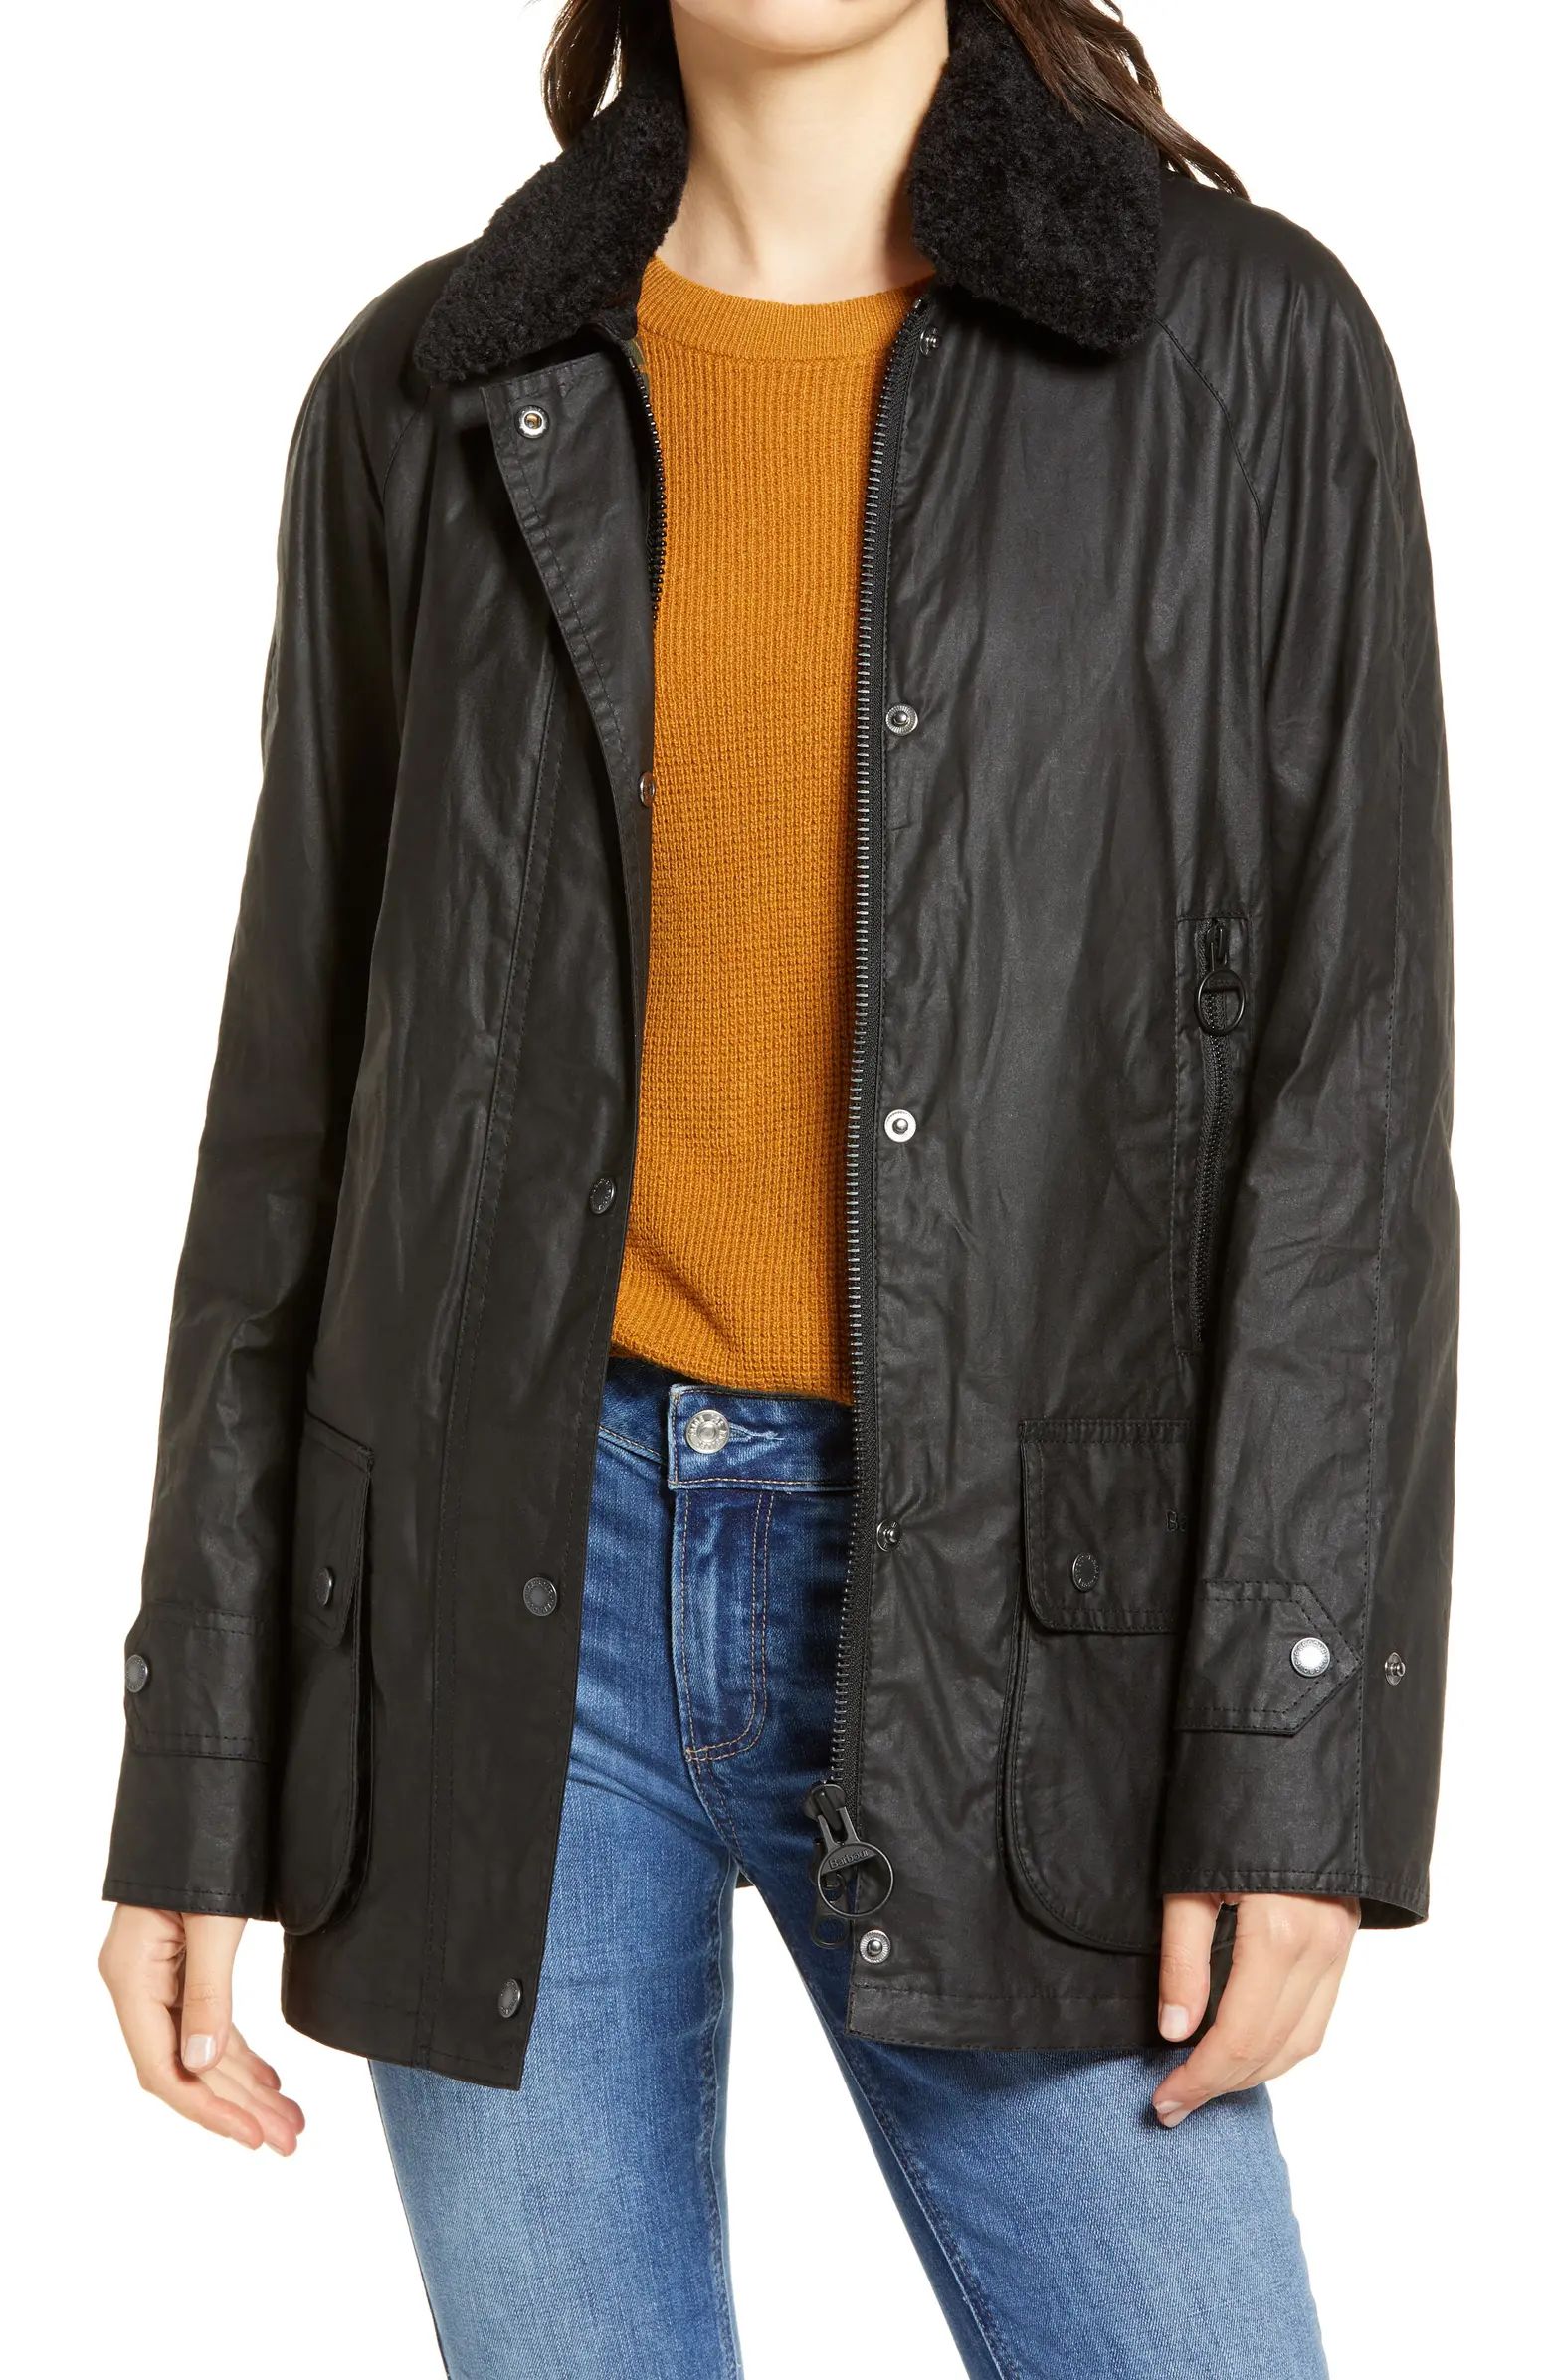 Barbour Goodwood Waxed Cotton Rain Jacket with Faux Shearling Trim | Nordstrom | Nordstrom